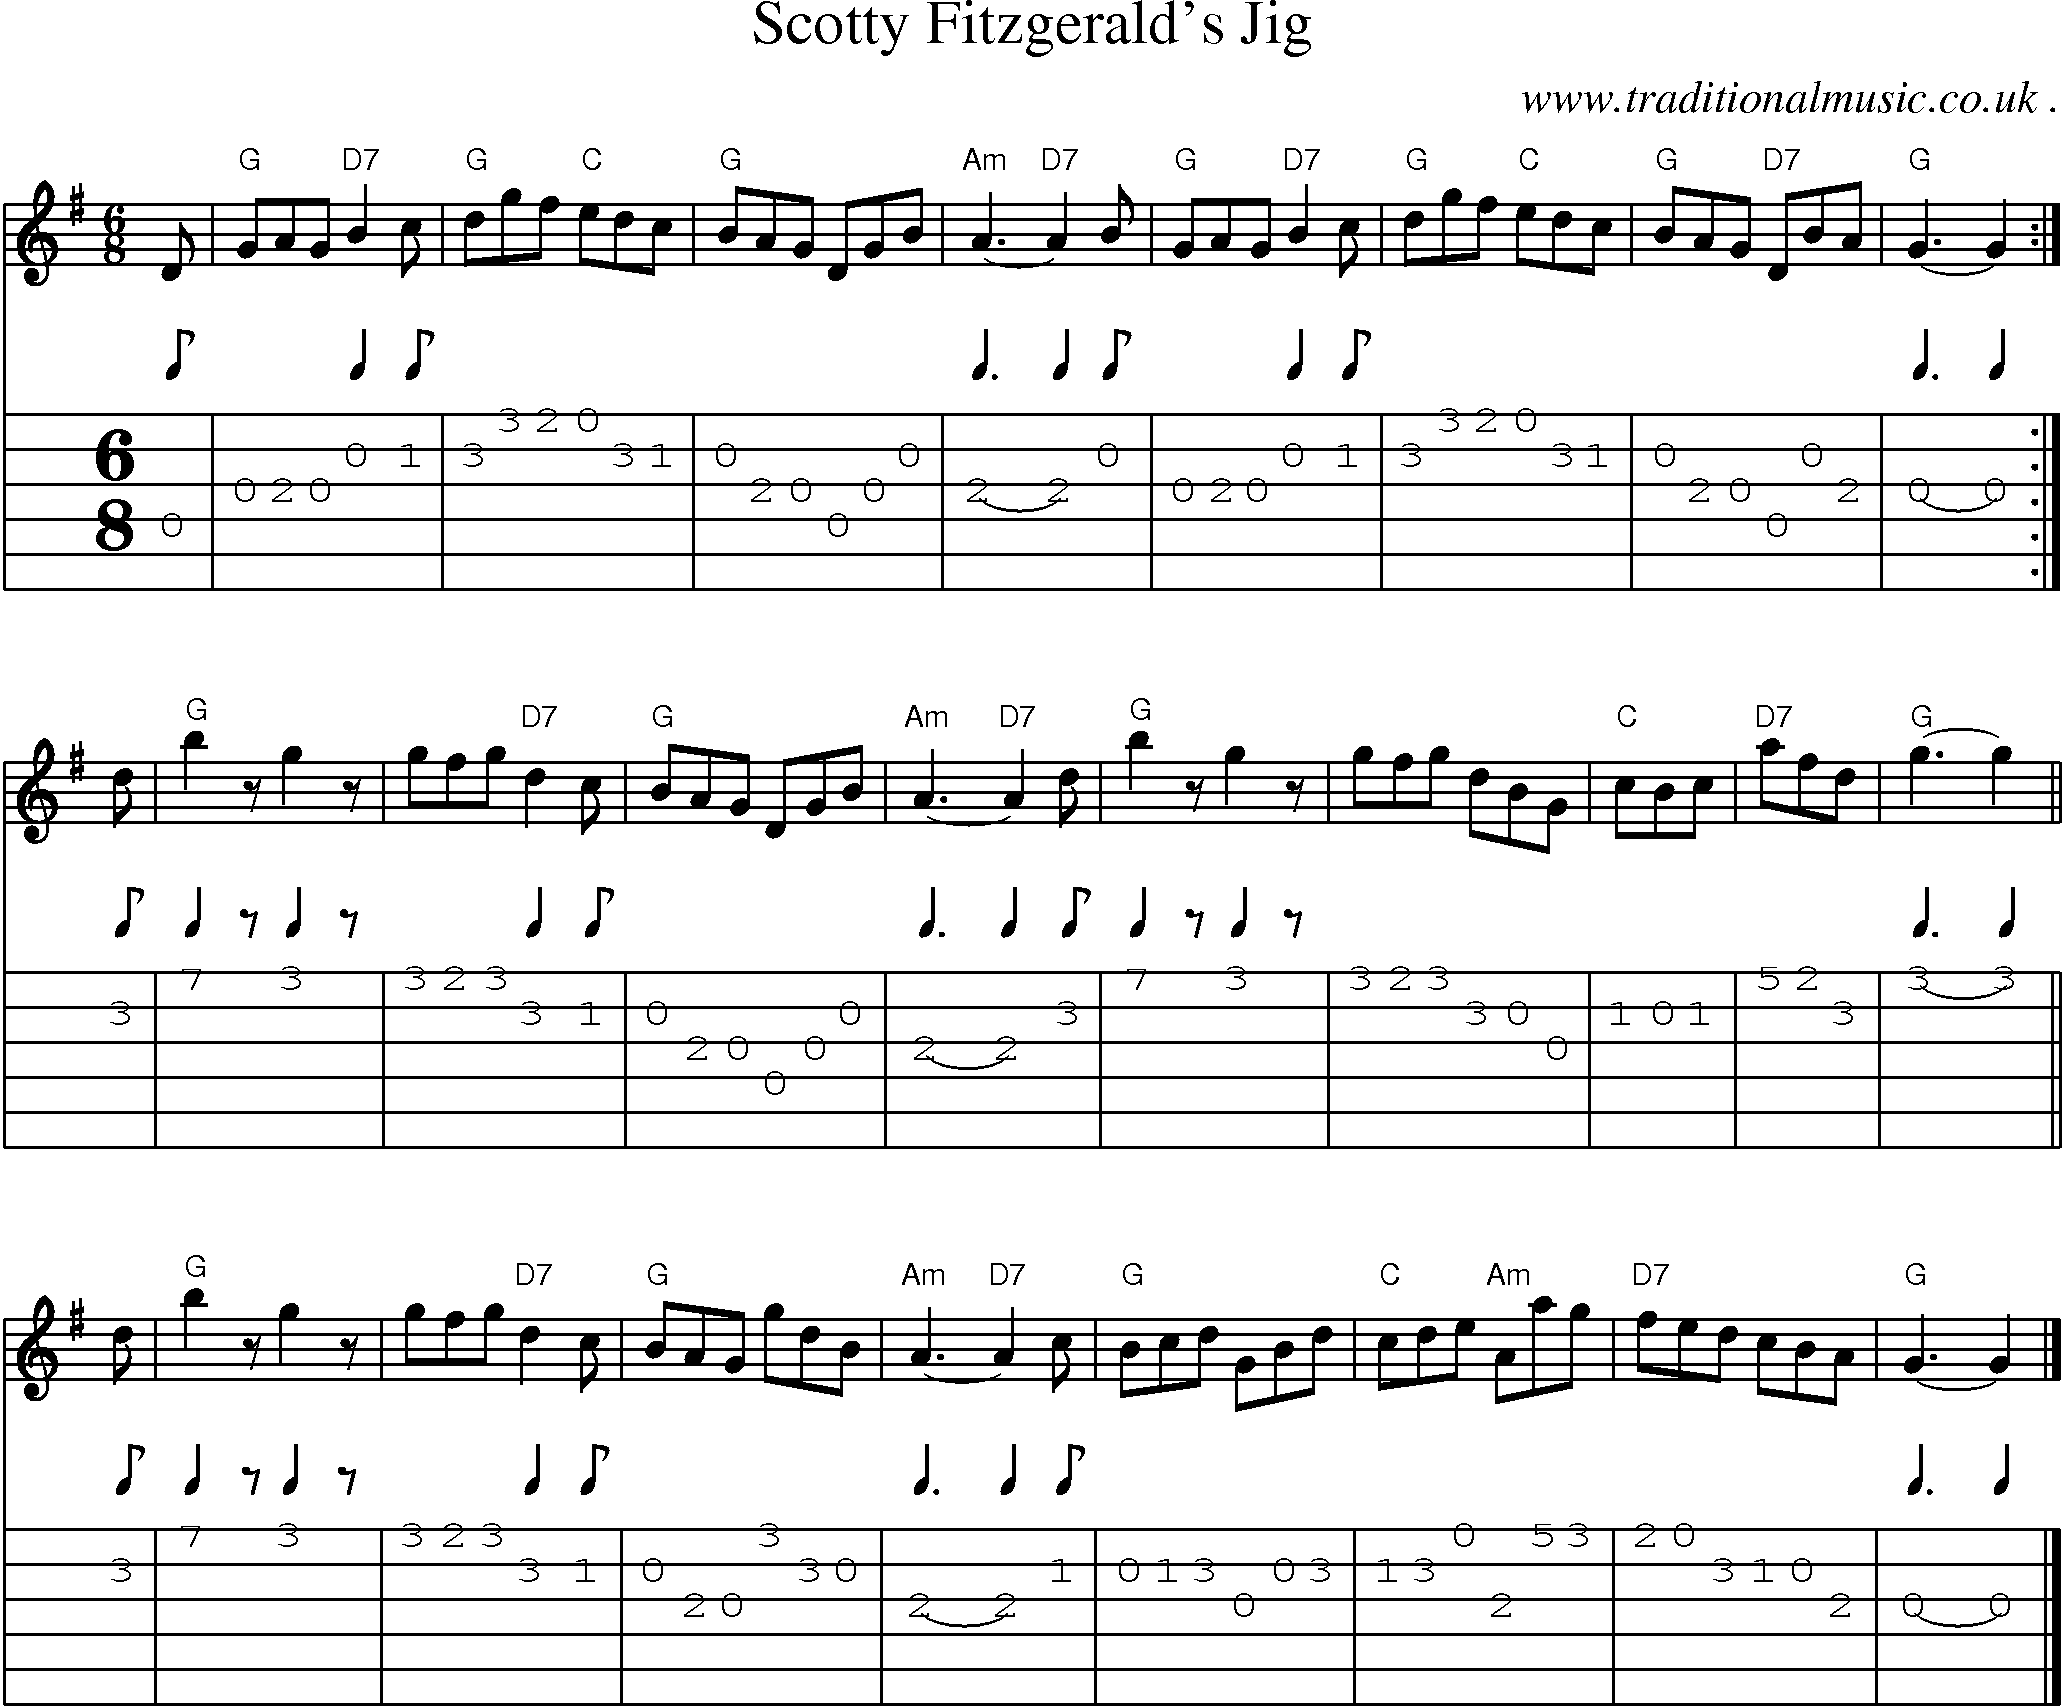 Sheet-music  score, Chords and Guitar Tabs for Scotty Fitzgeralds Jig